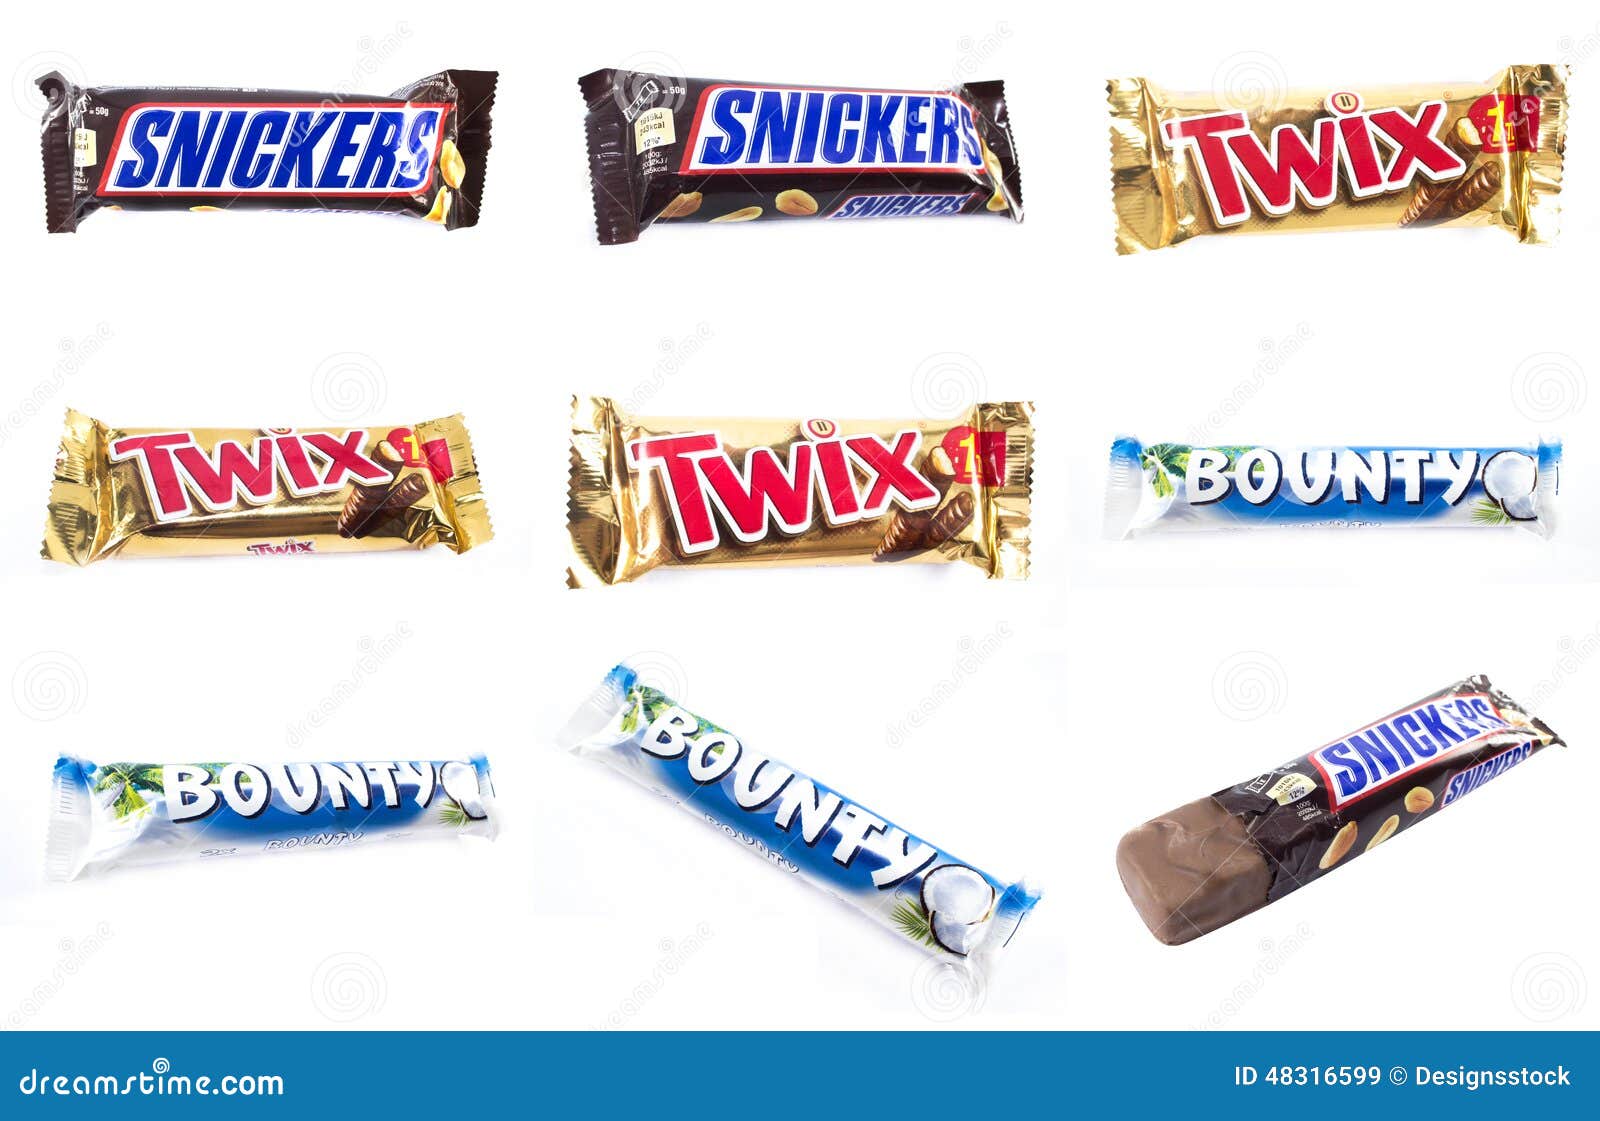 Delicious Taste Snickers Chocolate Bar Multipack 7 X 41.7 G at Best Price  in Amsterdam | Pyc Holding Bv